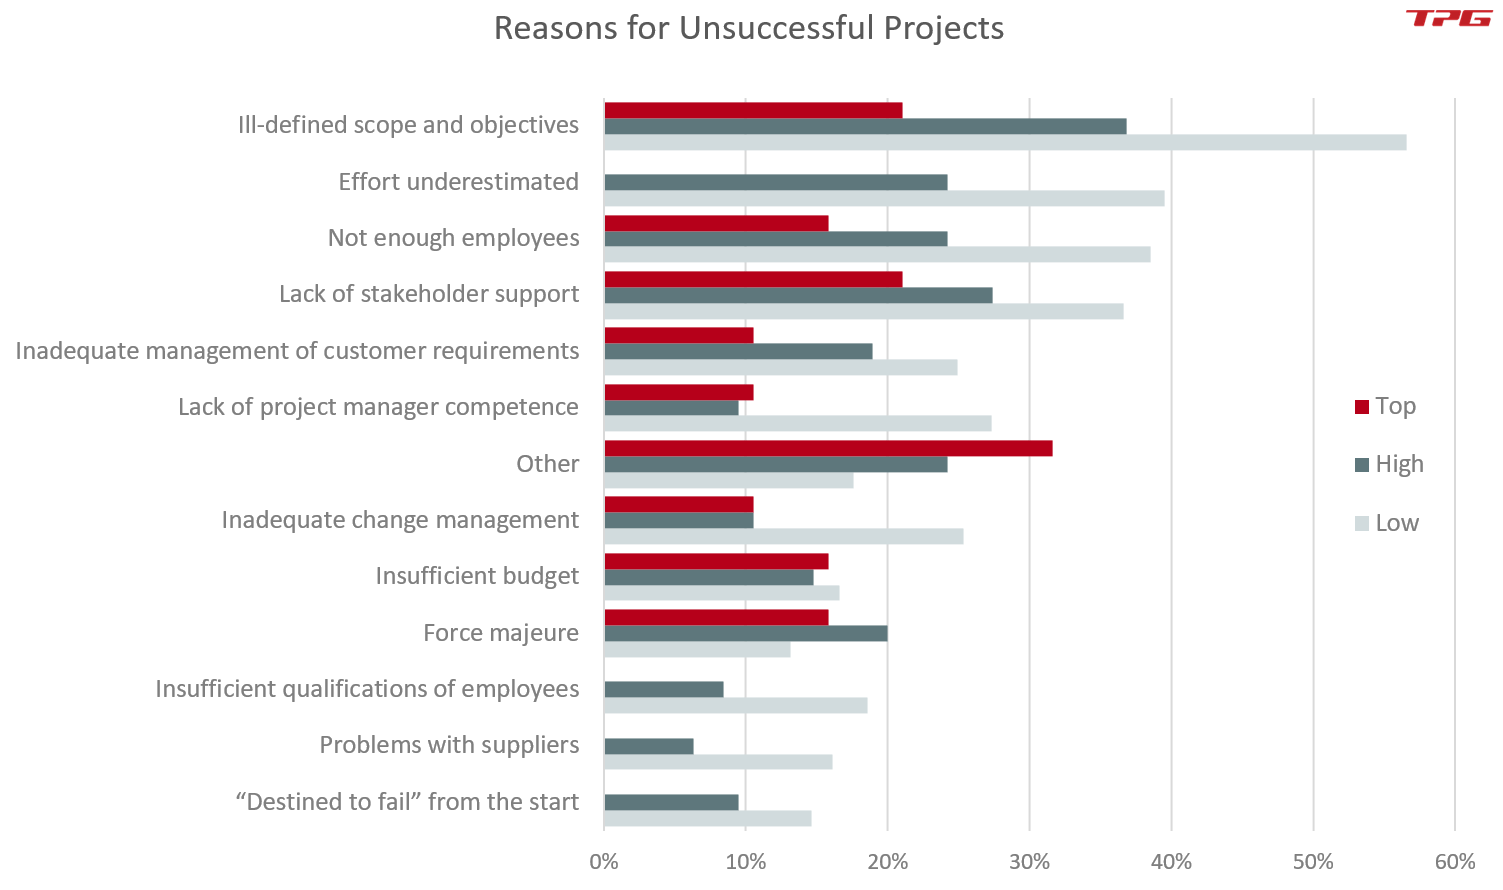 Reasons for unsuccessful projects – important for the PMO (project management office)